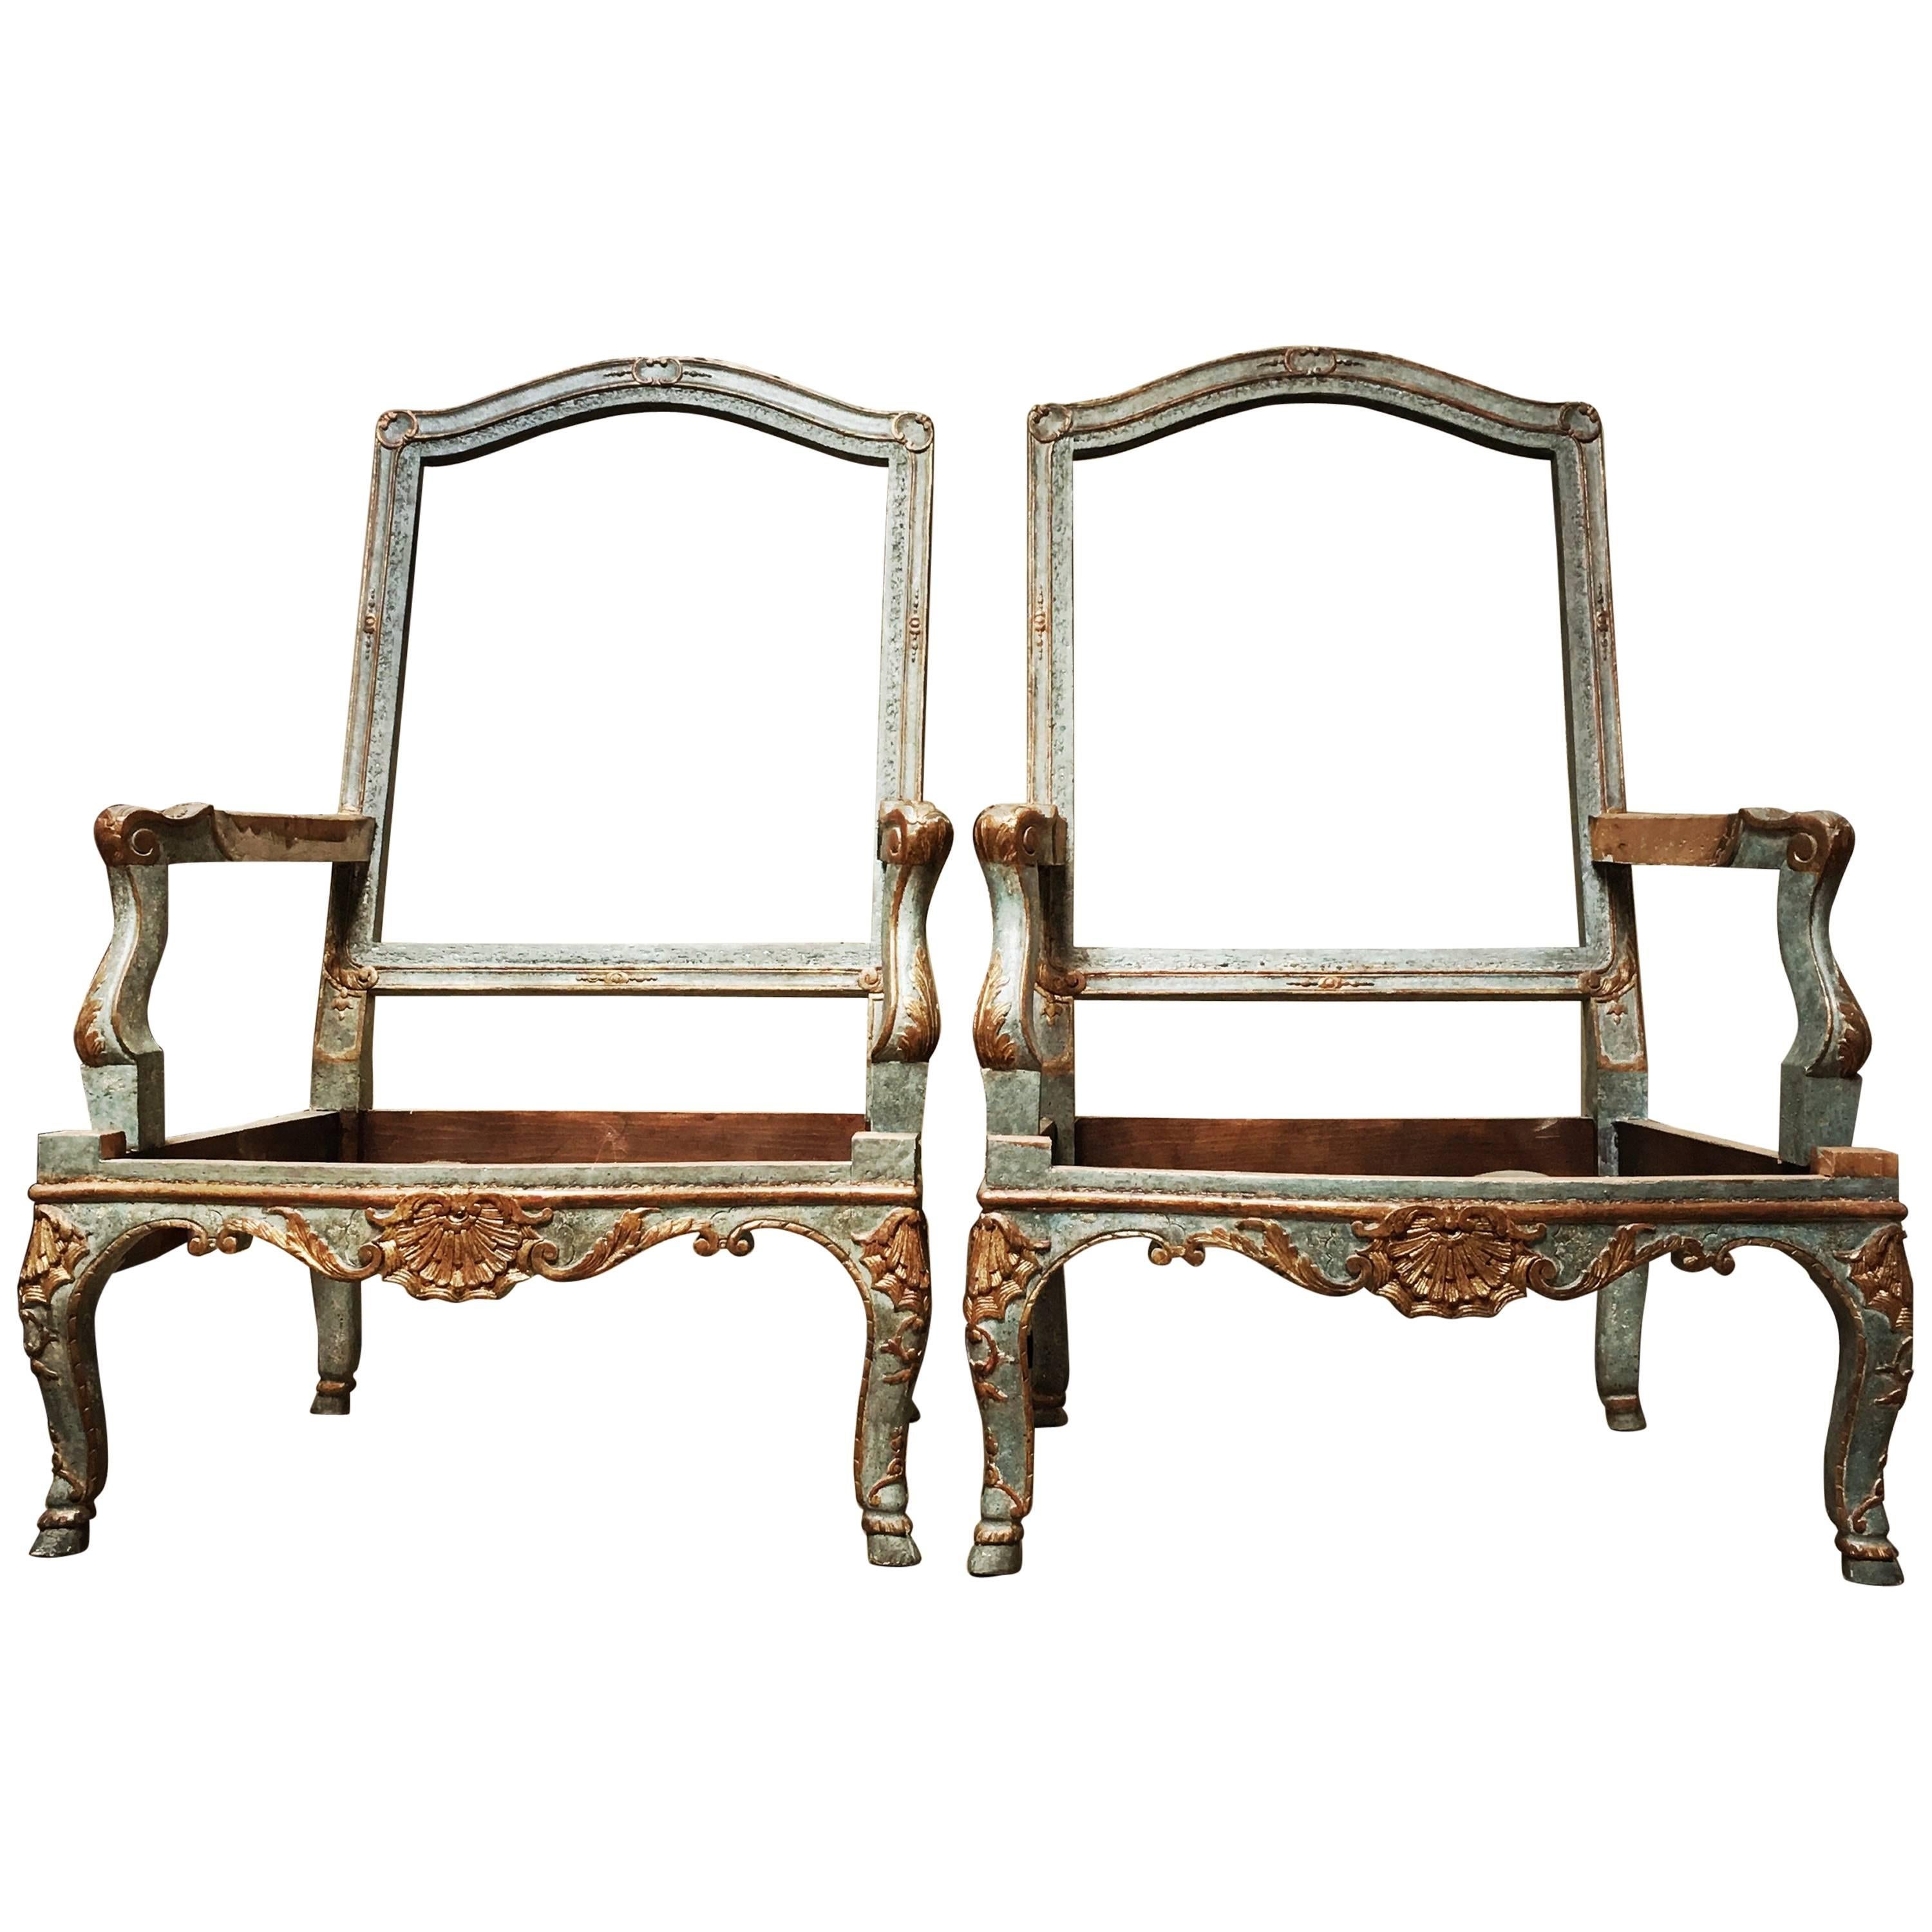 Pair of French Baroque Style Armchair Frames in a Blue and Gilt Finish